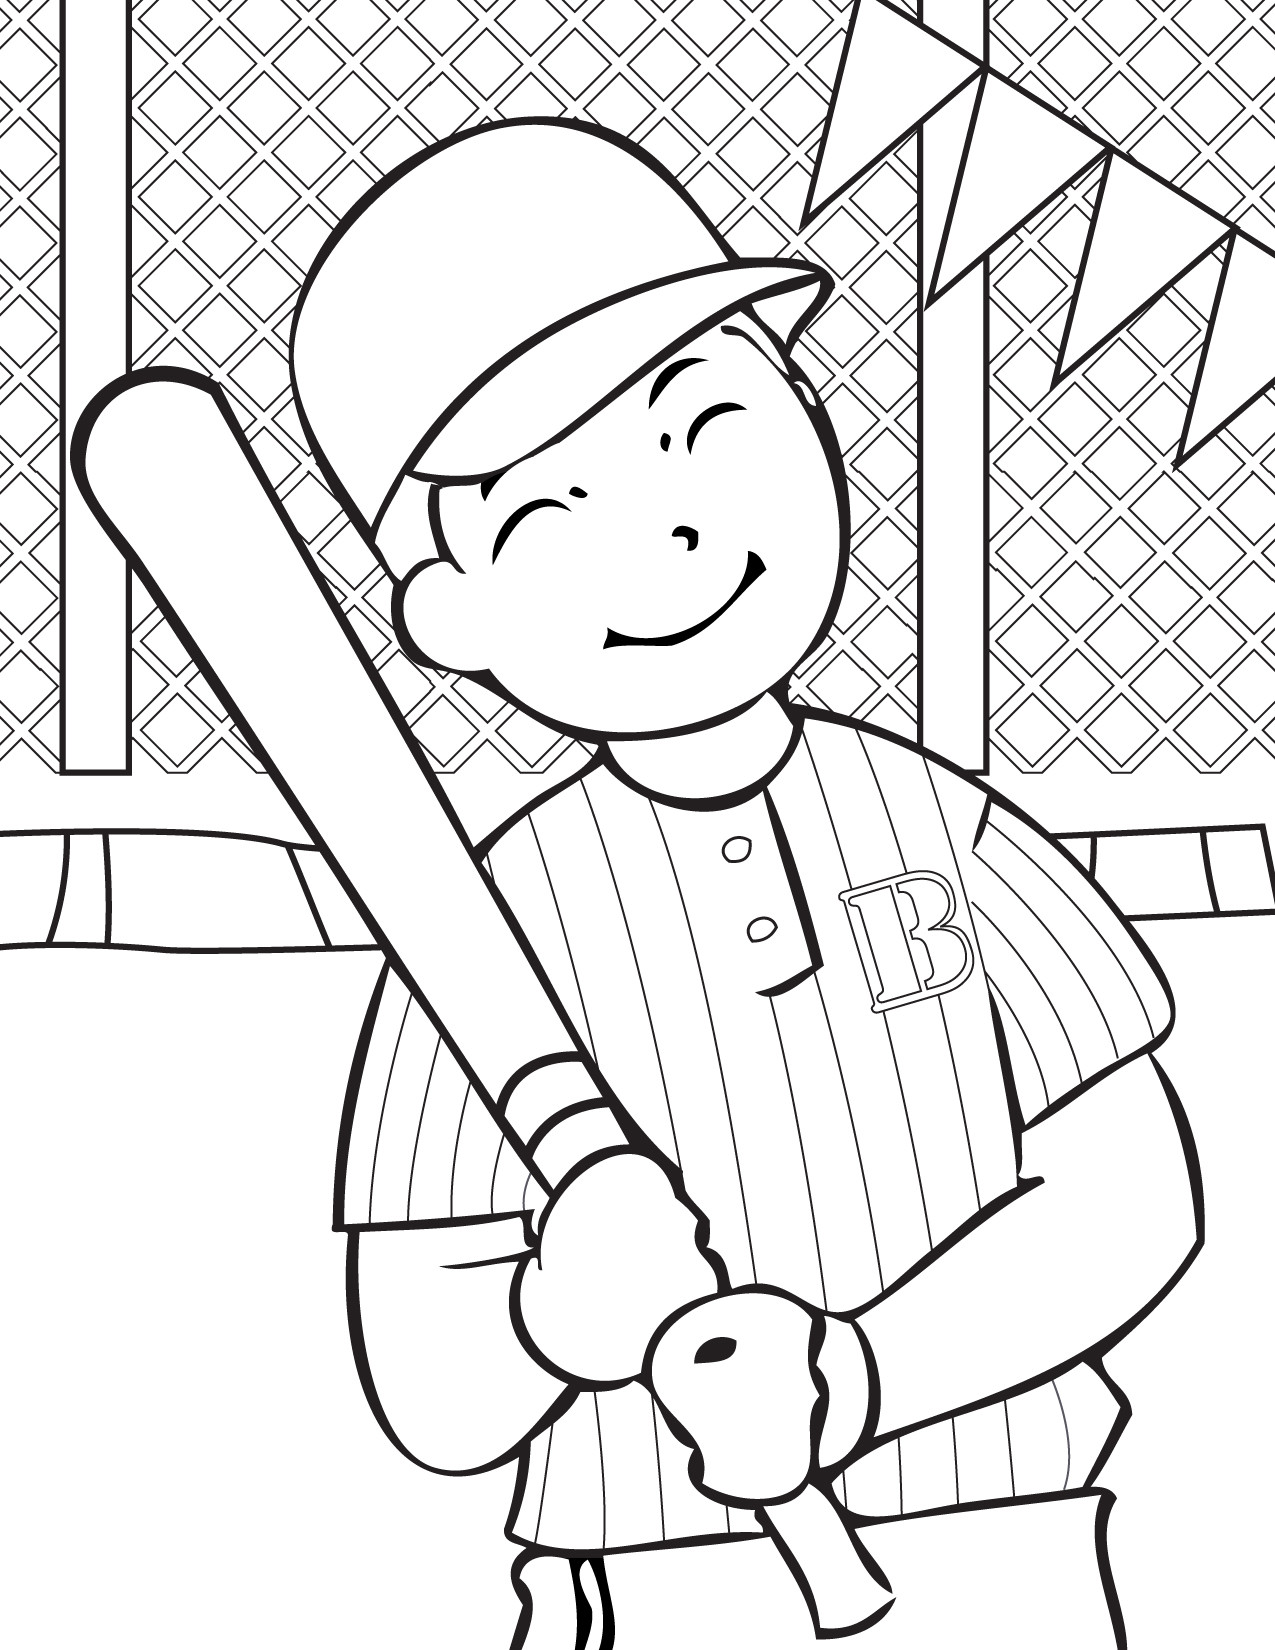 Baseball Coloring Sheets For Boys
 Free Printable Baseball Coloring Pages for Kids Best